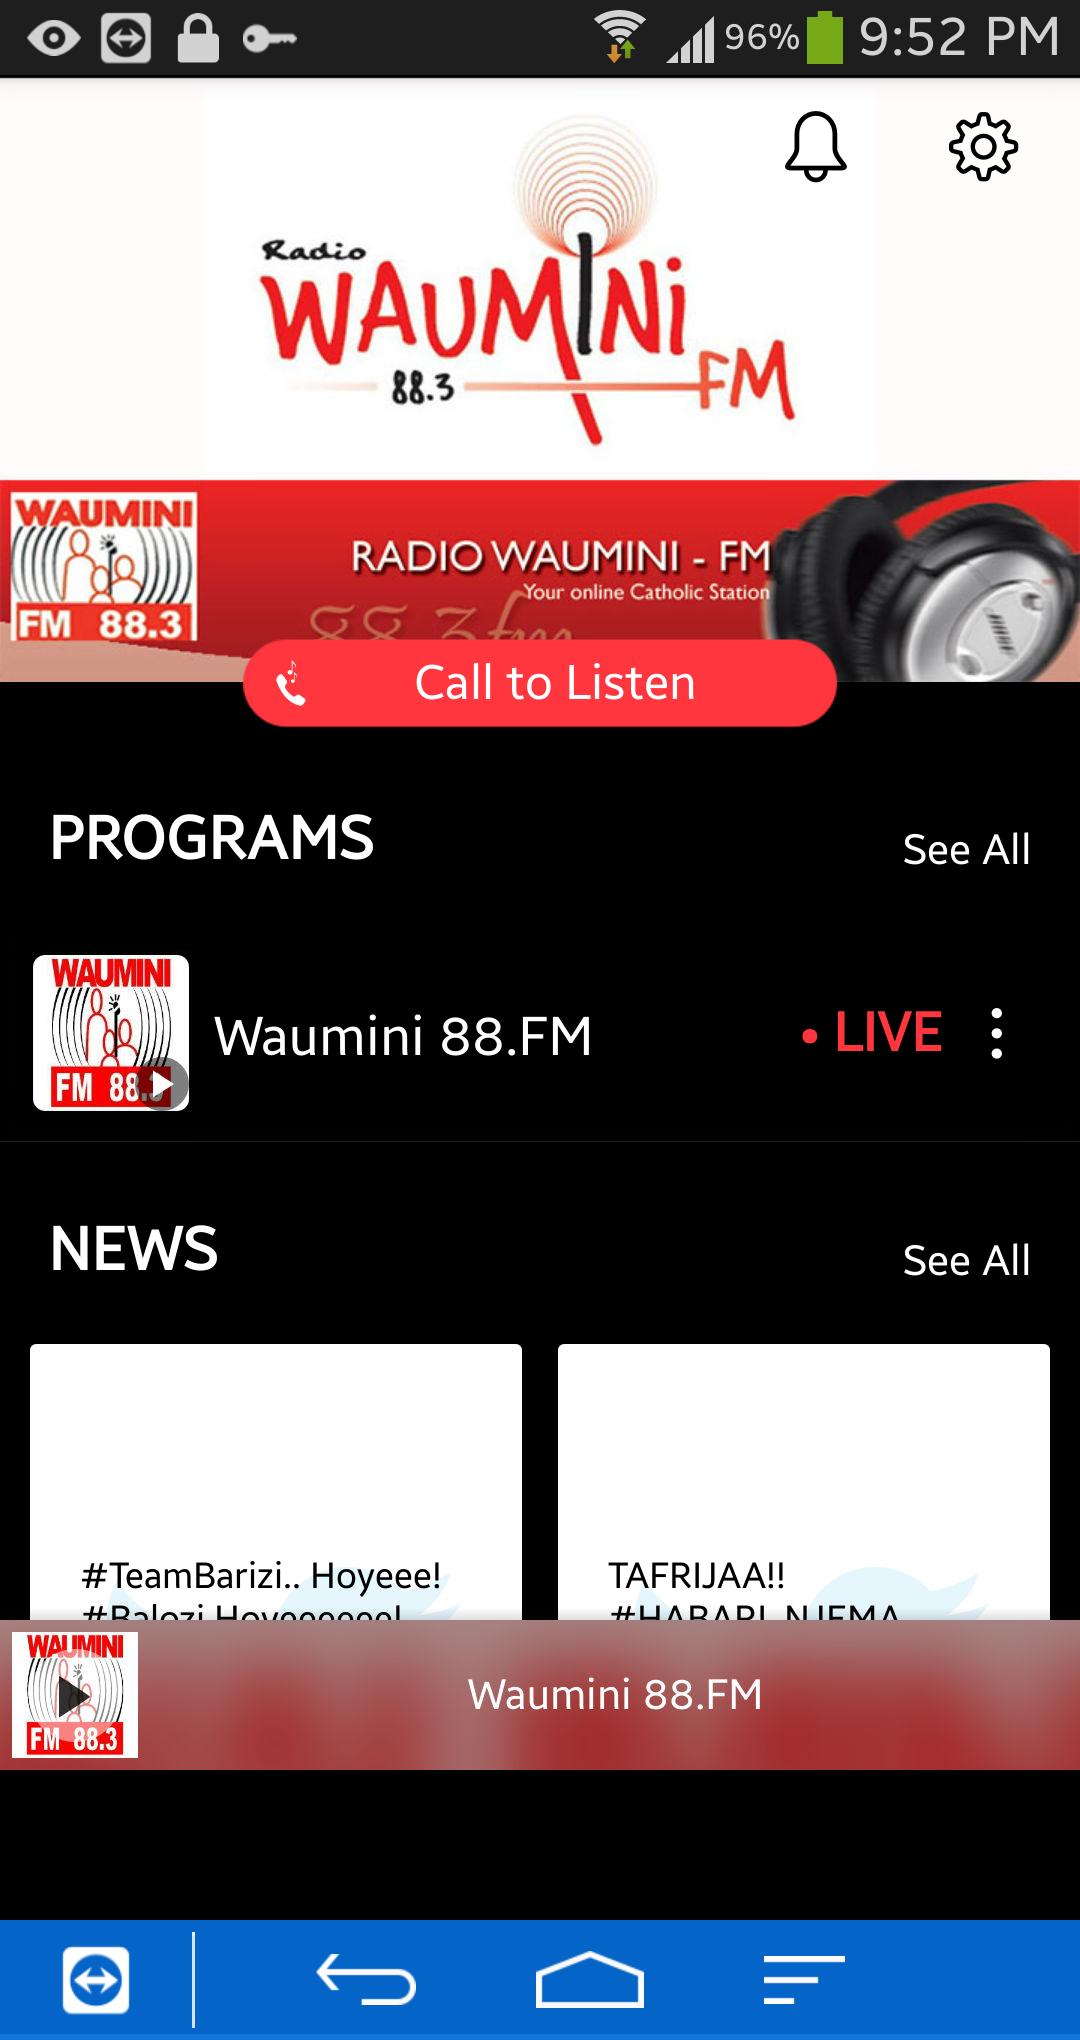 RADIO WAUMINI 88.3 FM for Android - APK Download